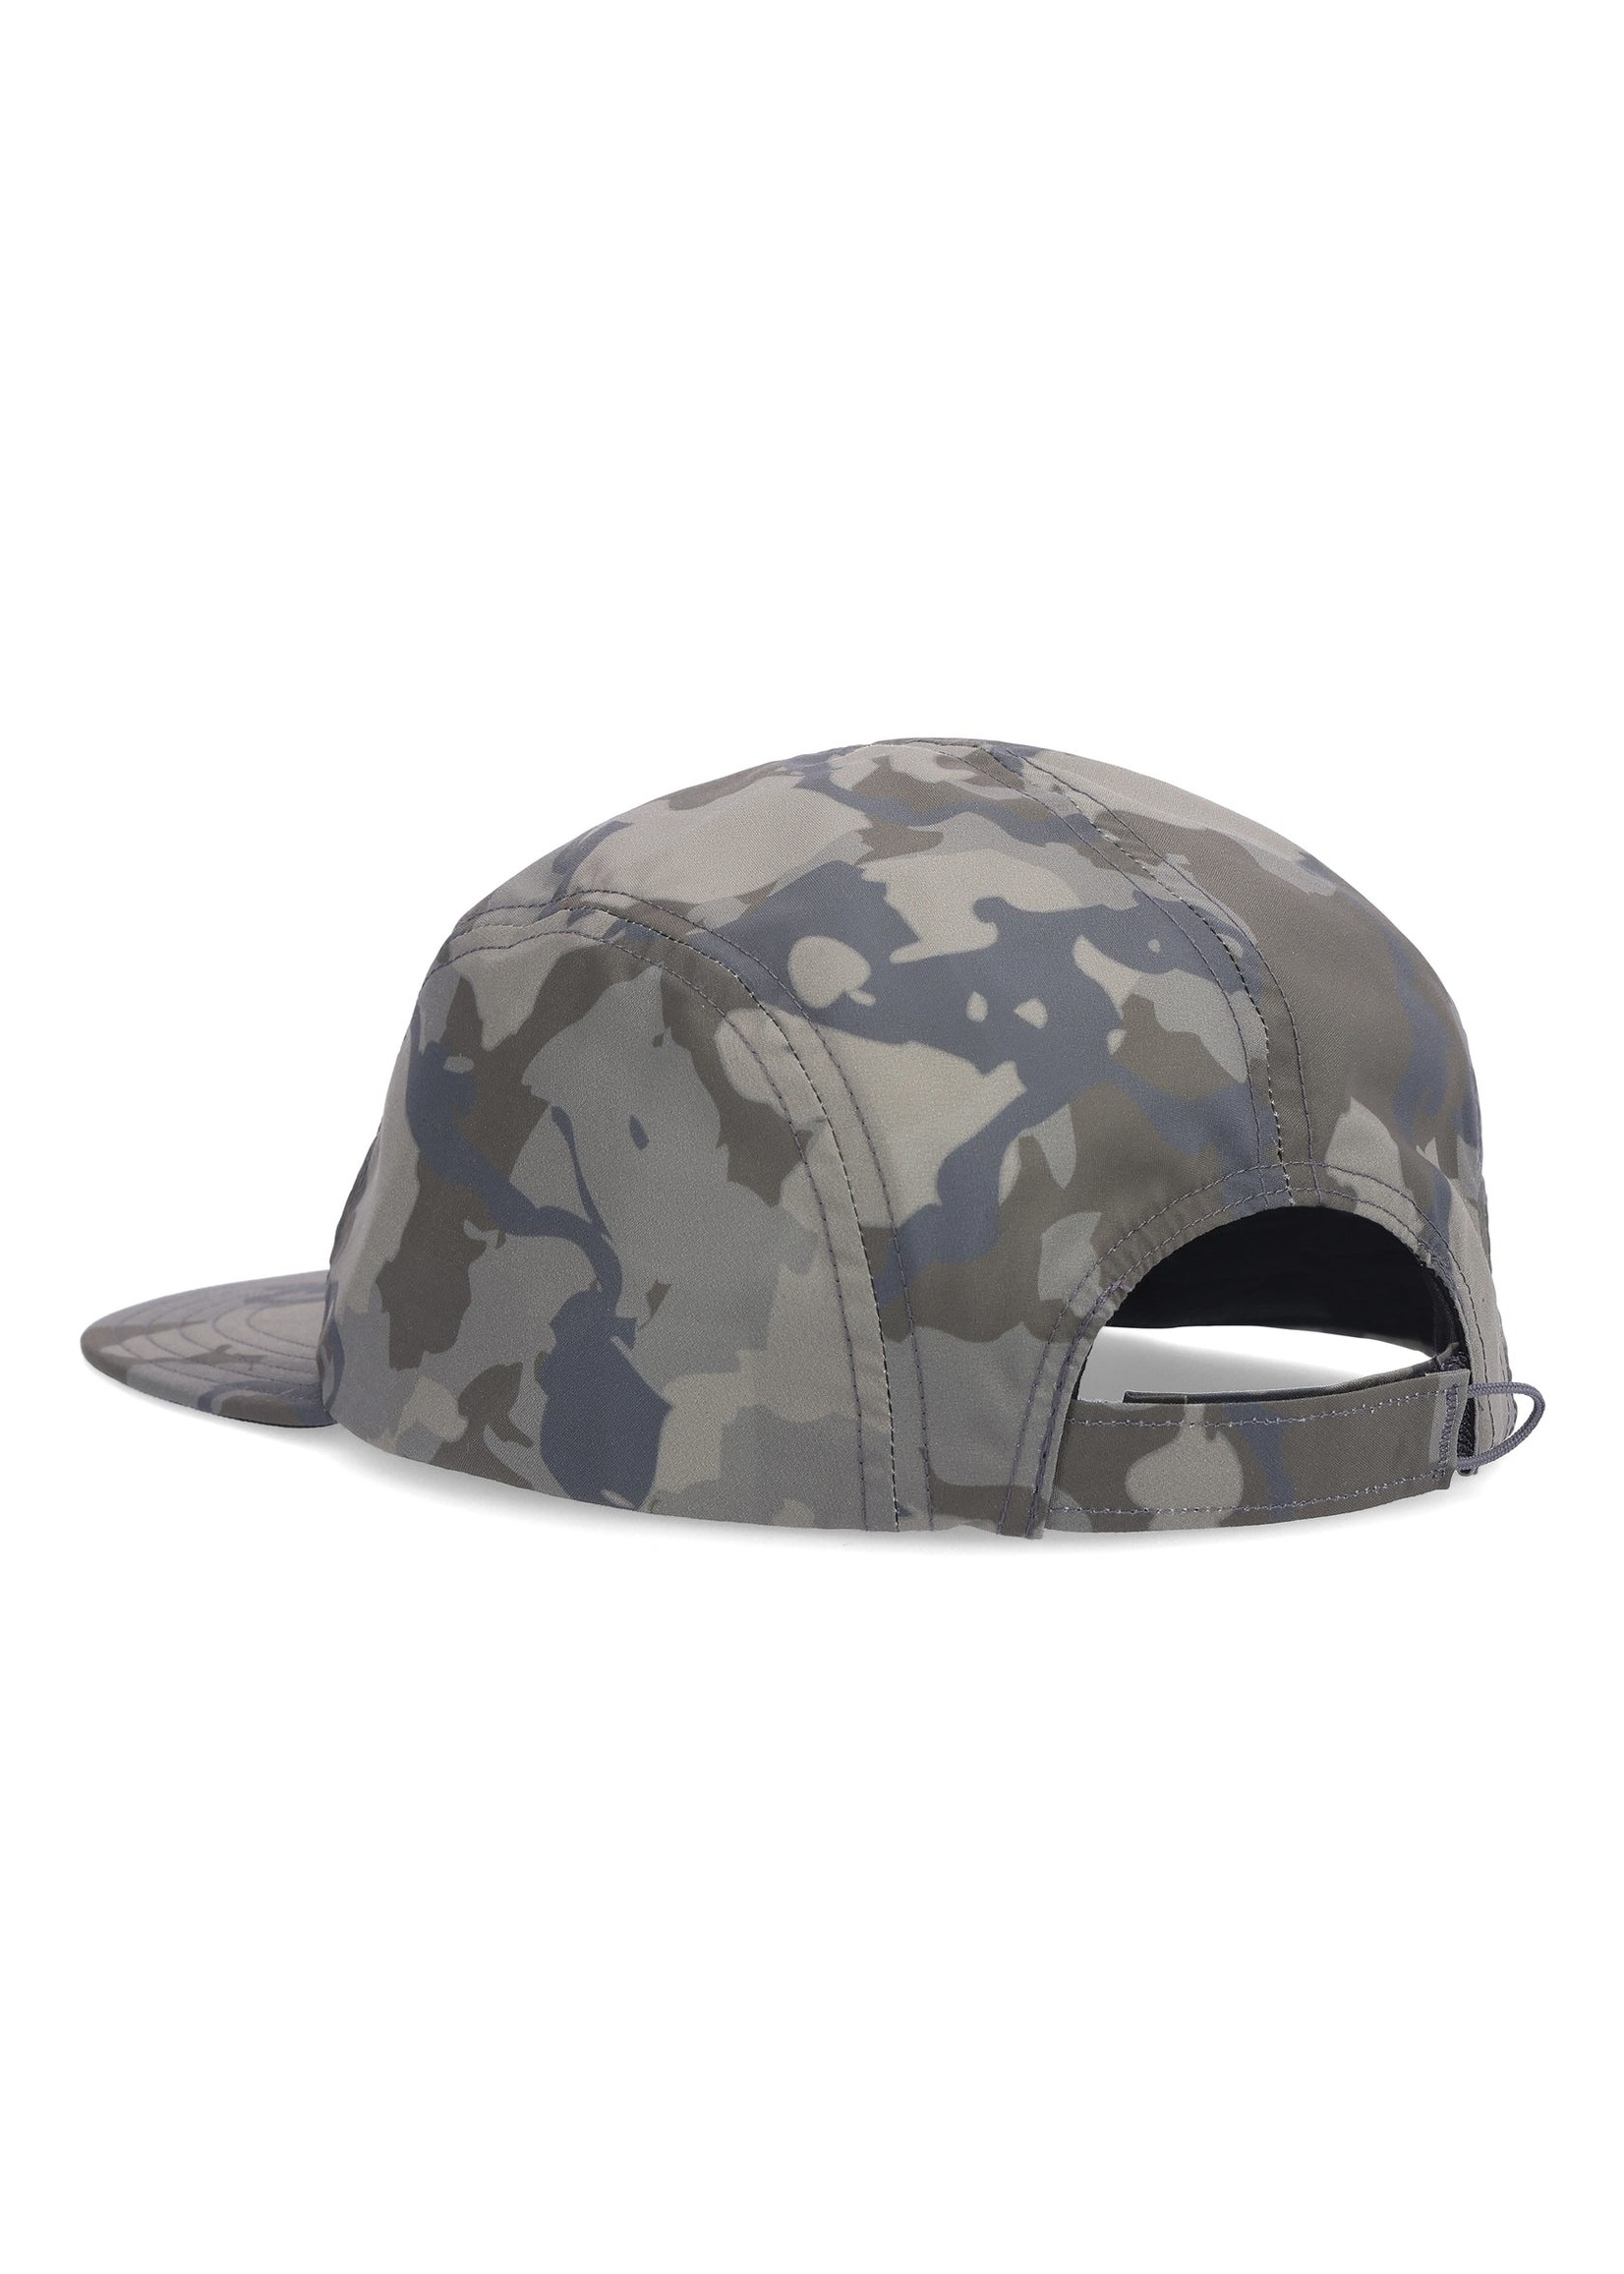 SIMMS Flyweight Mesh Cap Regiment Camo Olive Drab One Size